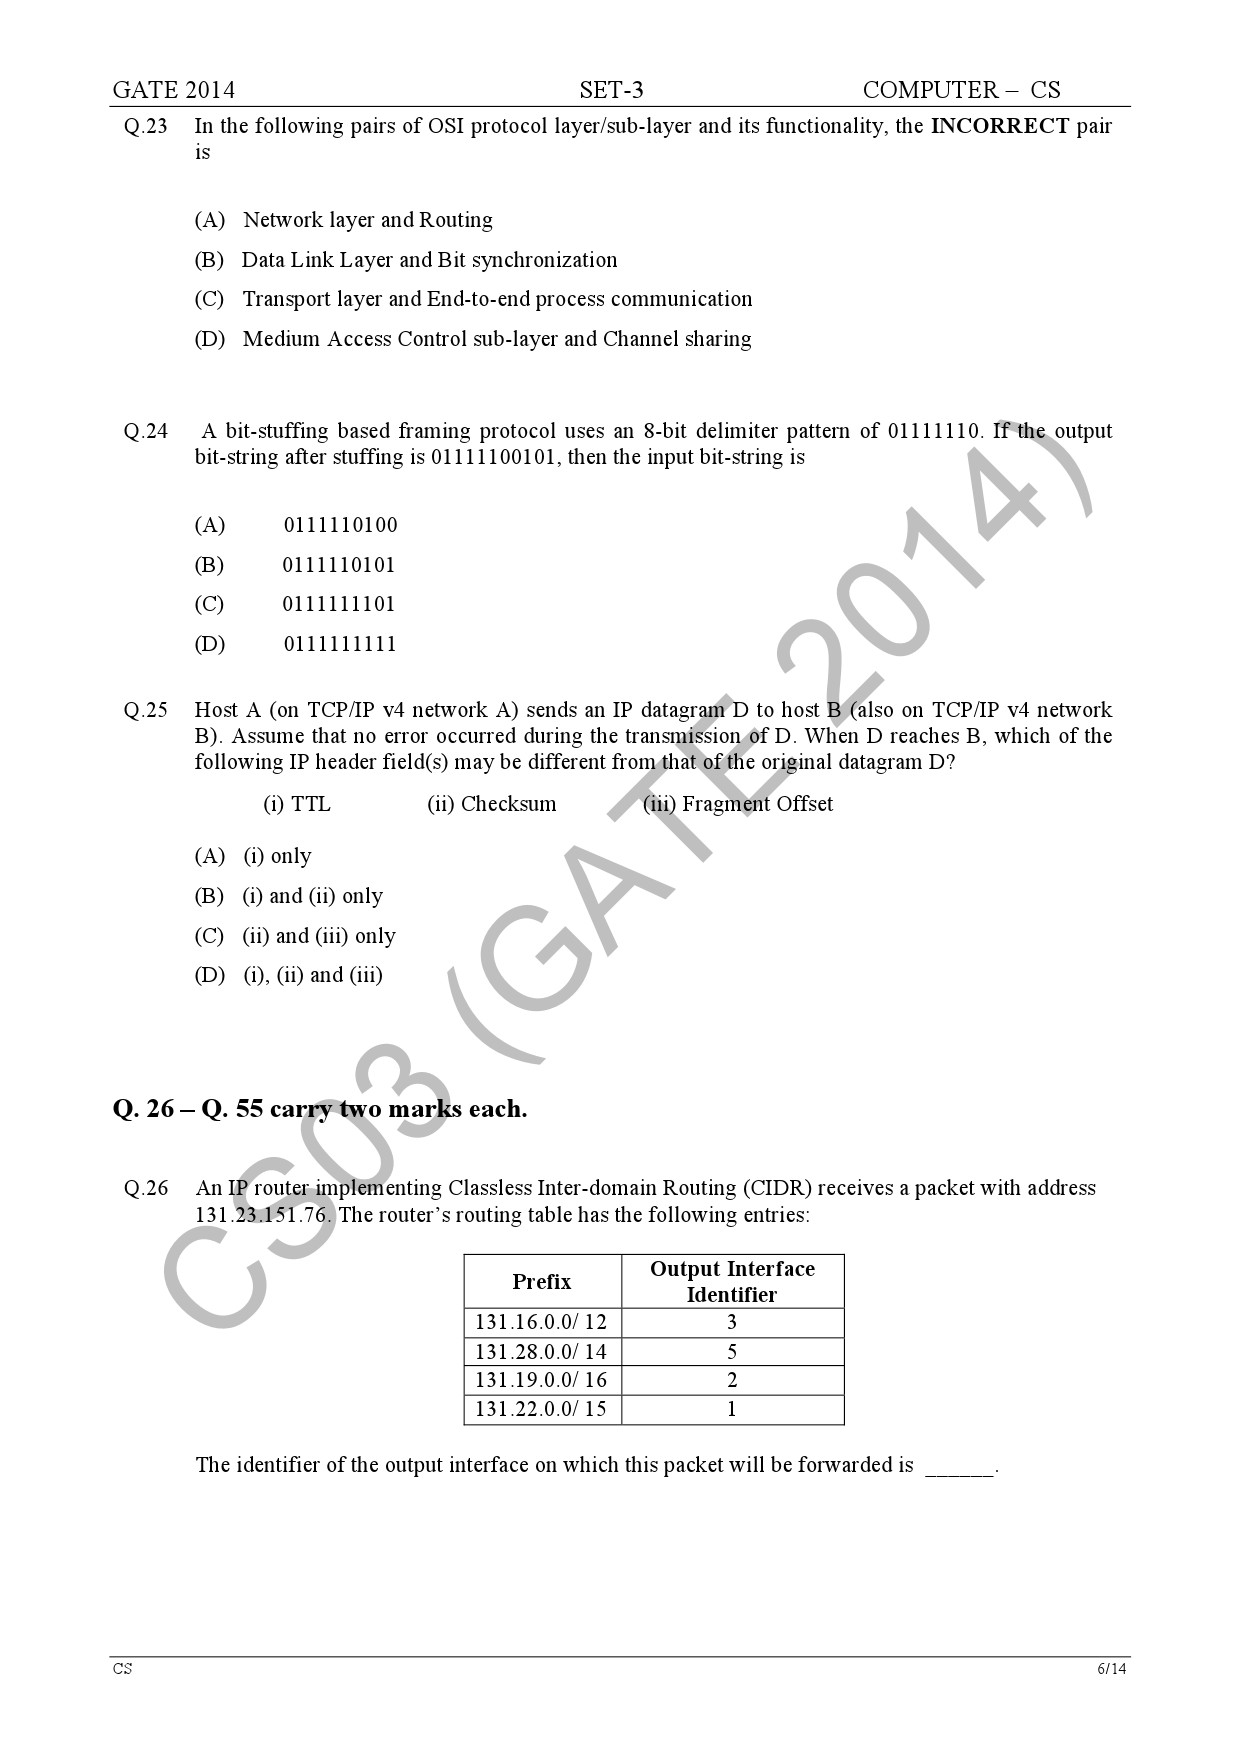 GATE Exam Question Paper 2014 Computer Science and Information Technology Set 3 12